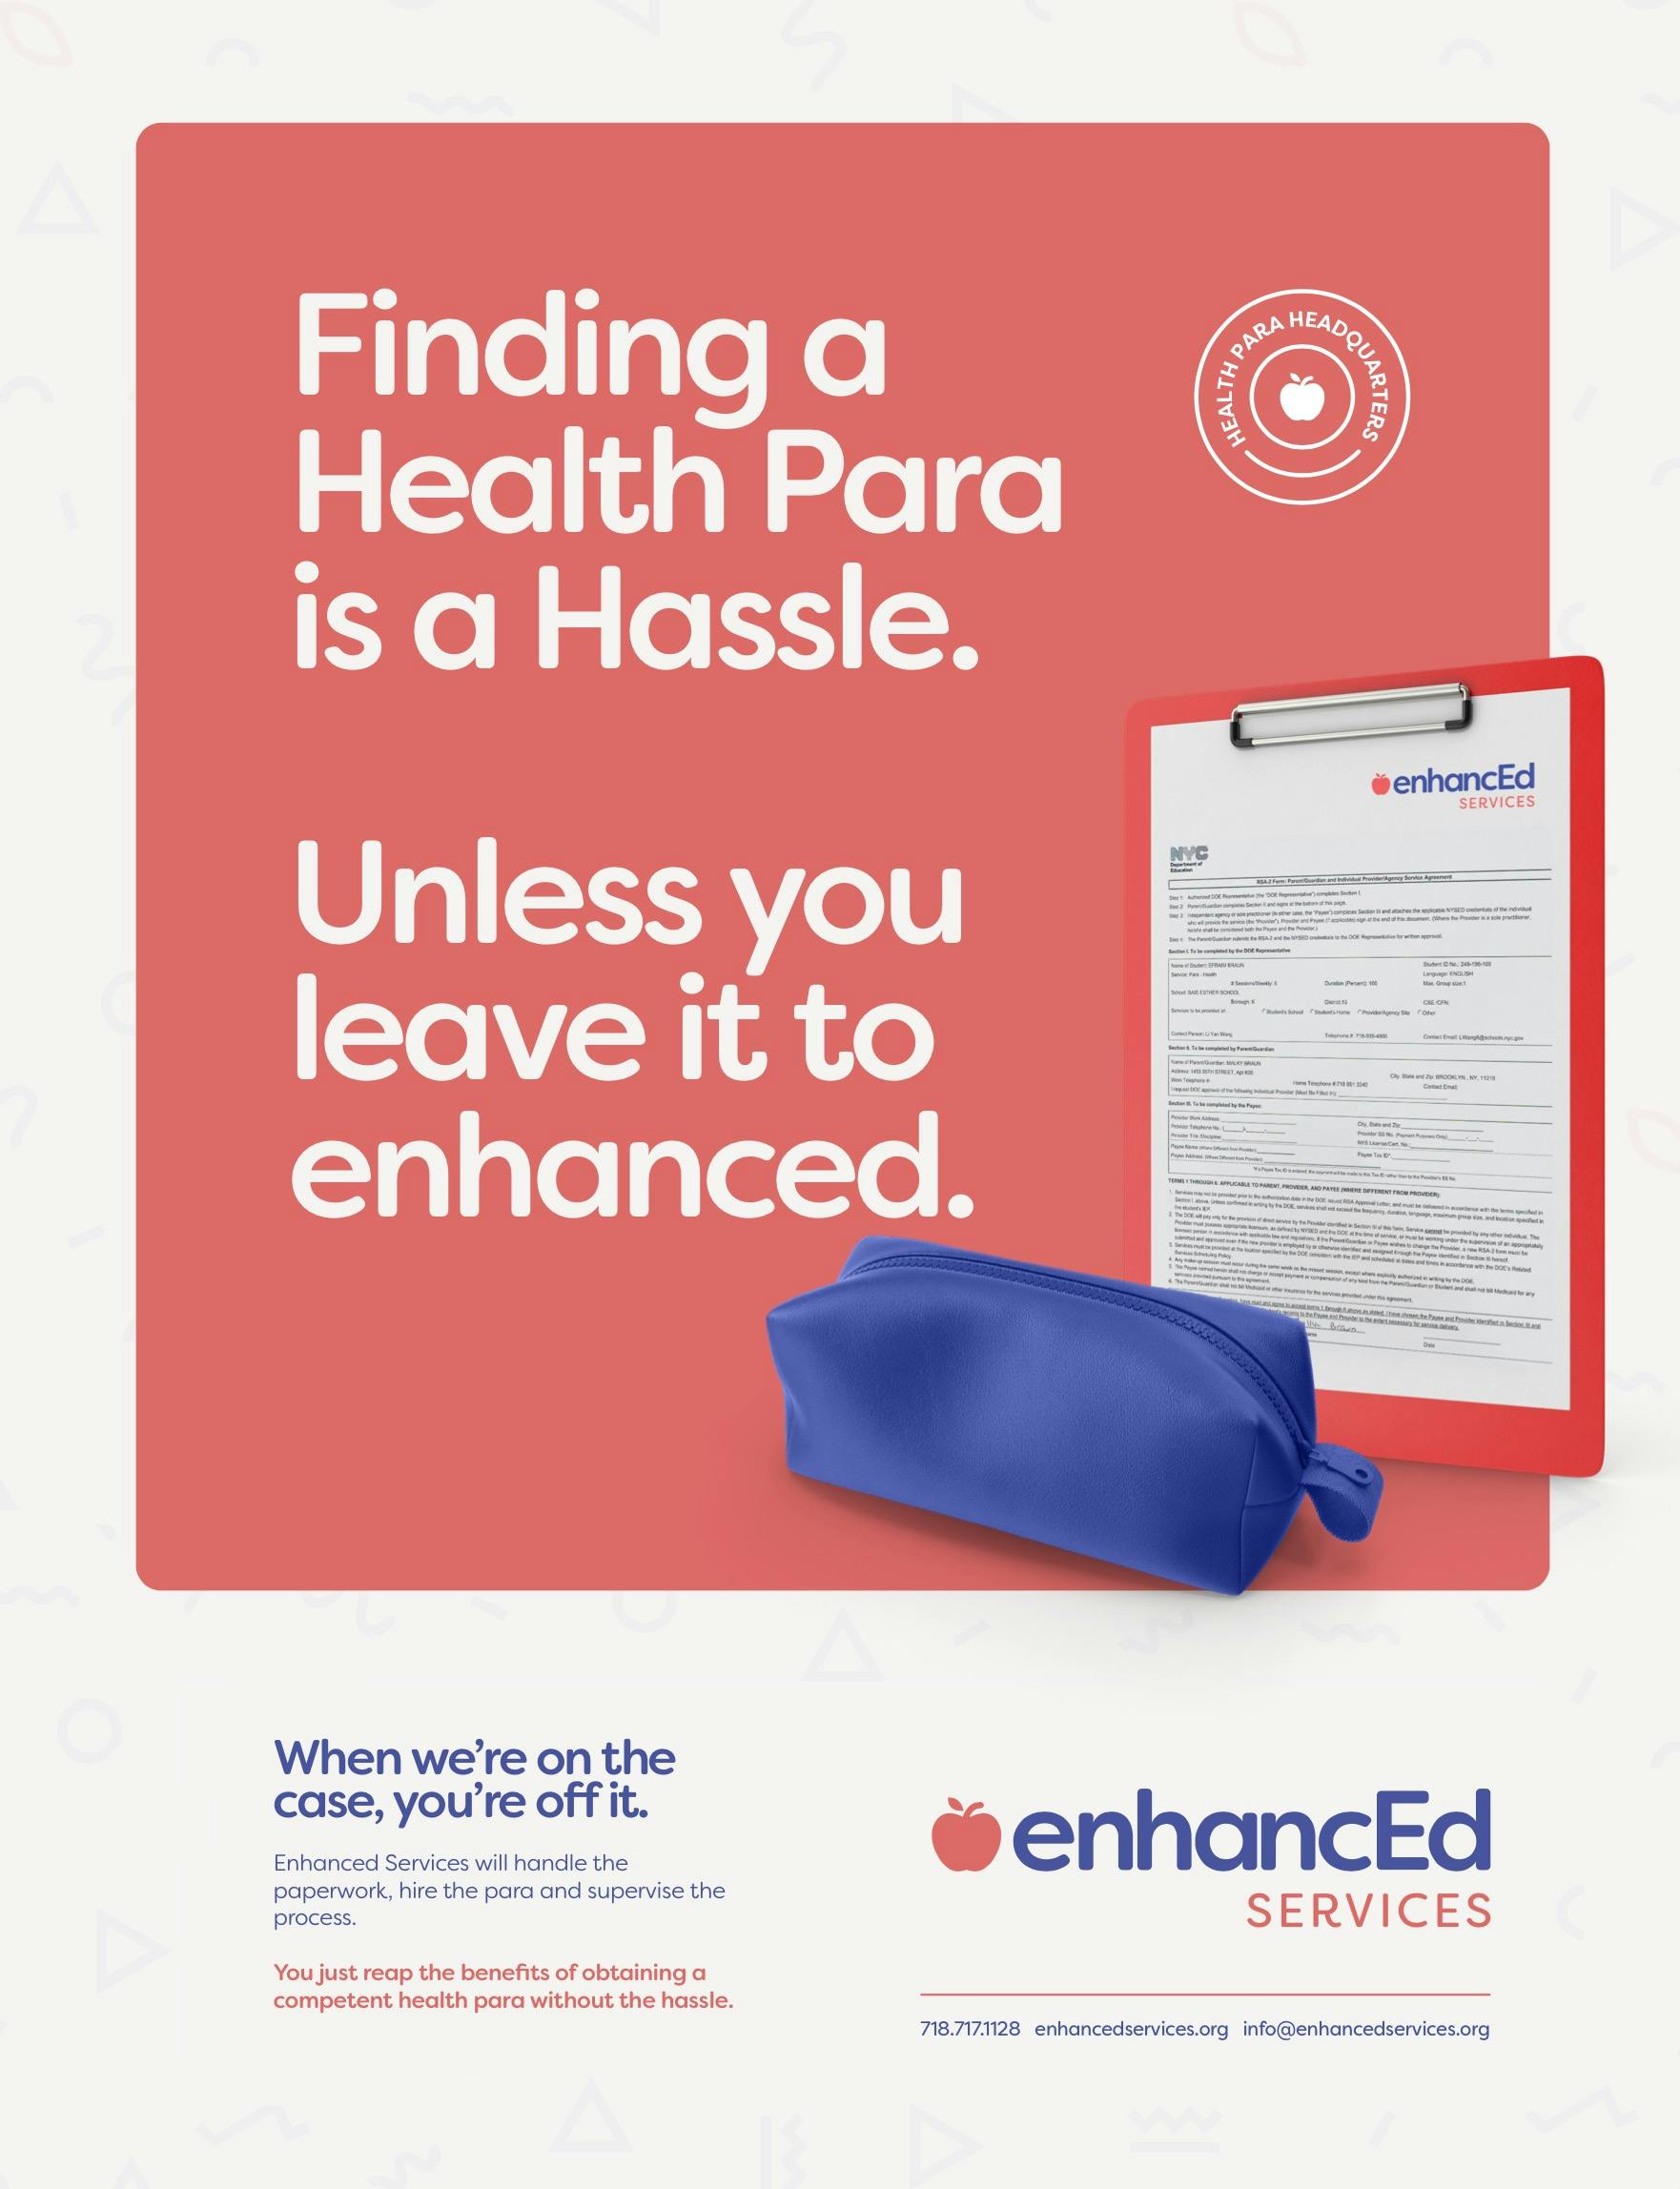 advertisement claiming that finding a health Para is a hassle.